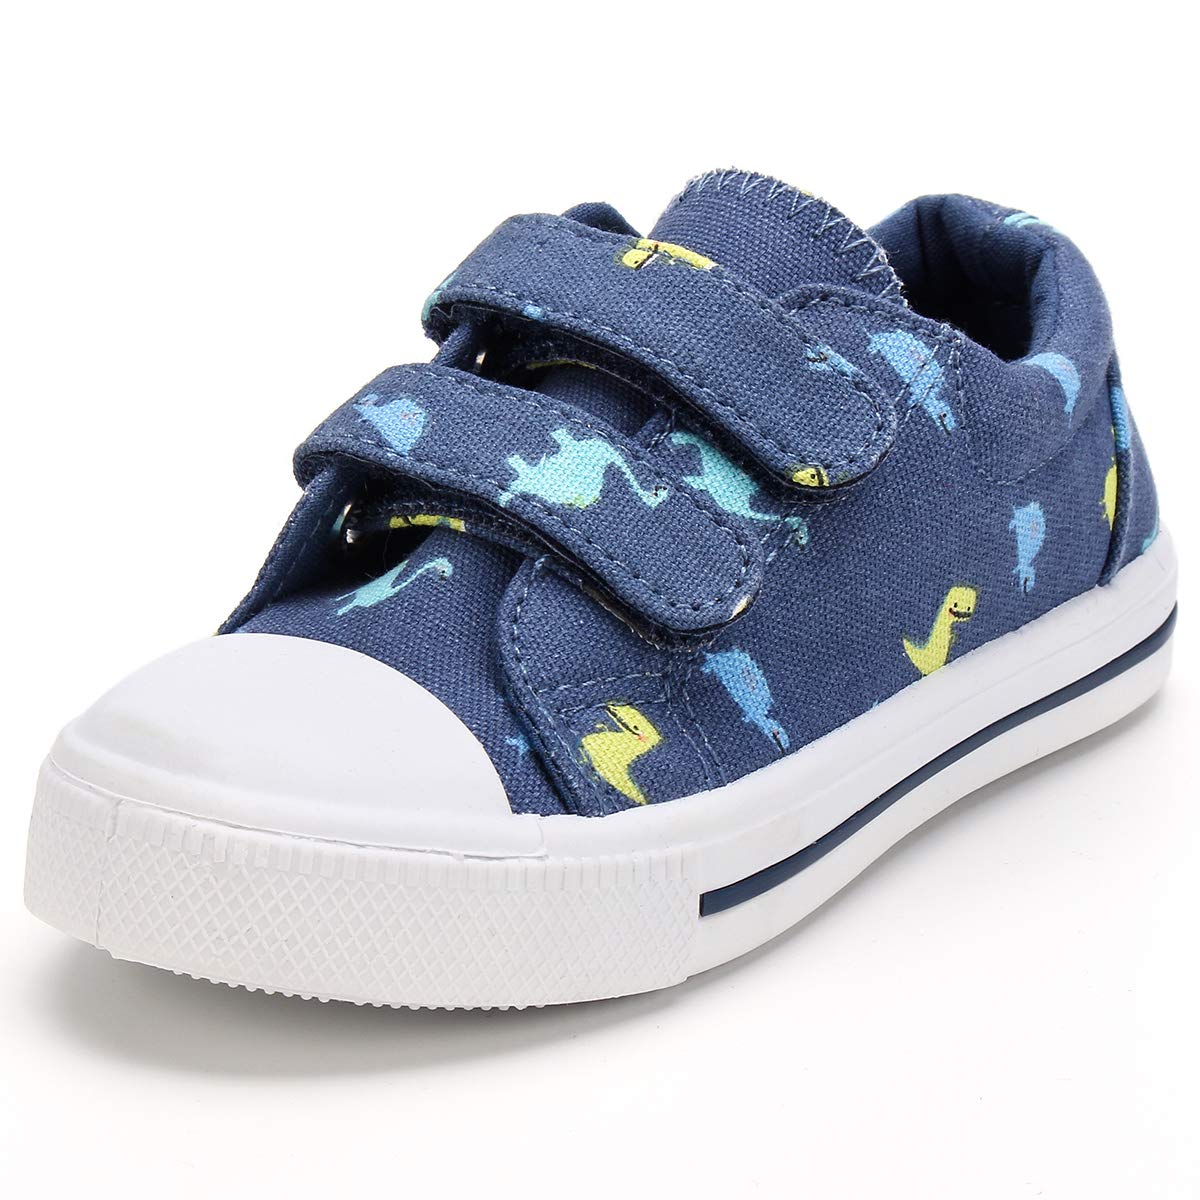 Children's Sneakers Girl Boy Toddler Sneakers Canvas Shoes